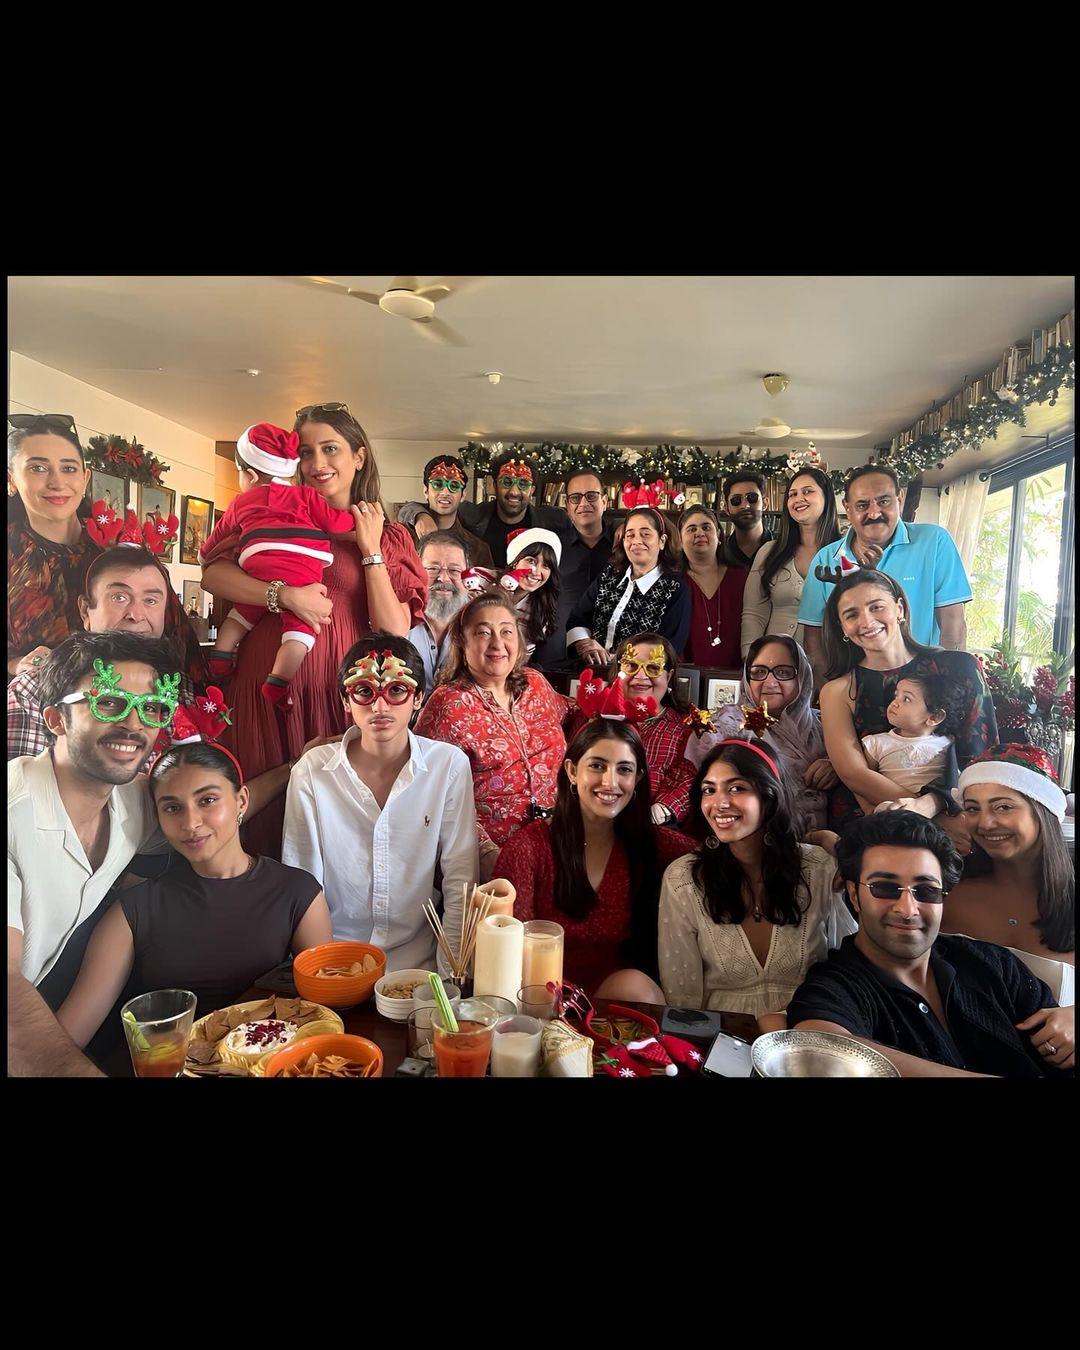 The Kapoor khandan decided to do their Christmas lunch in style as always. The pictures shared by Navya Nanda, daughter of Shweta Bachchan and Nikhil Nanda, we can see the entire family together.  Raha’s first glimpses with her parents was the highlight of the day and Christmas this year